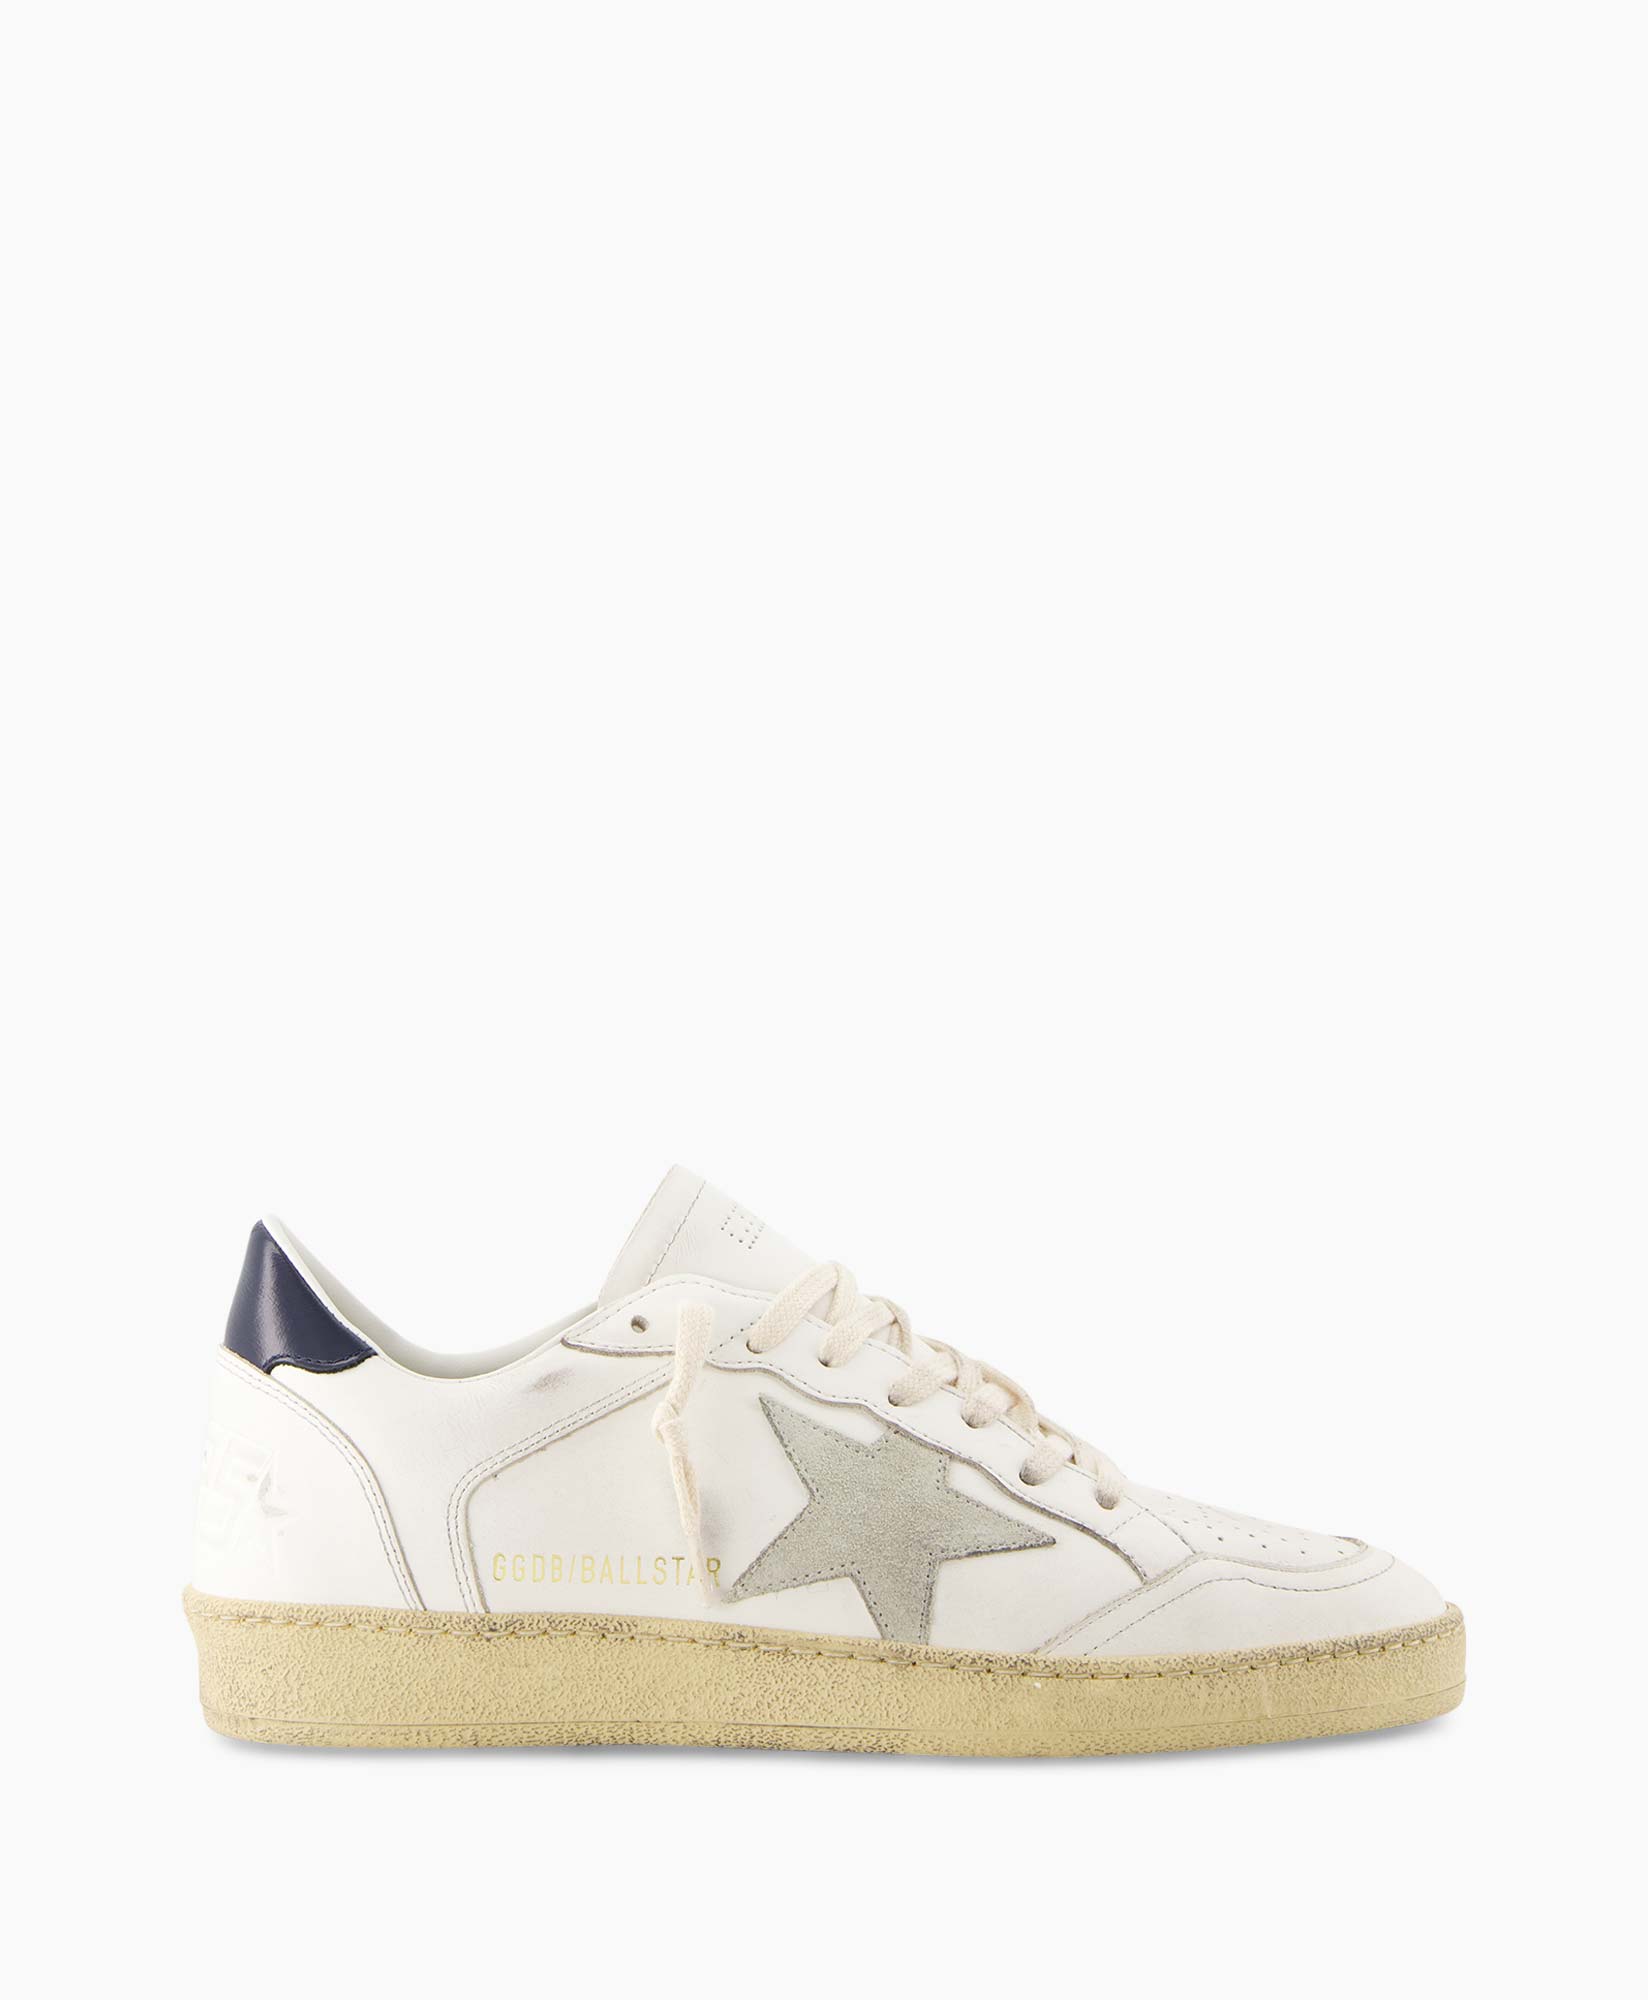 Sneaker Ballstar Leather Upper Suede Star Shiny Le Off White